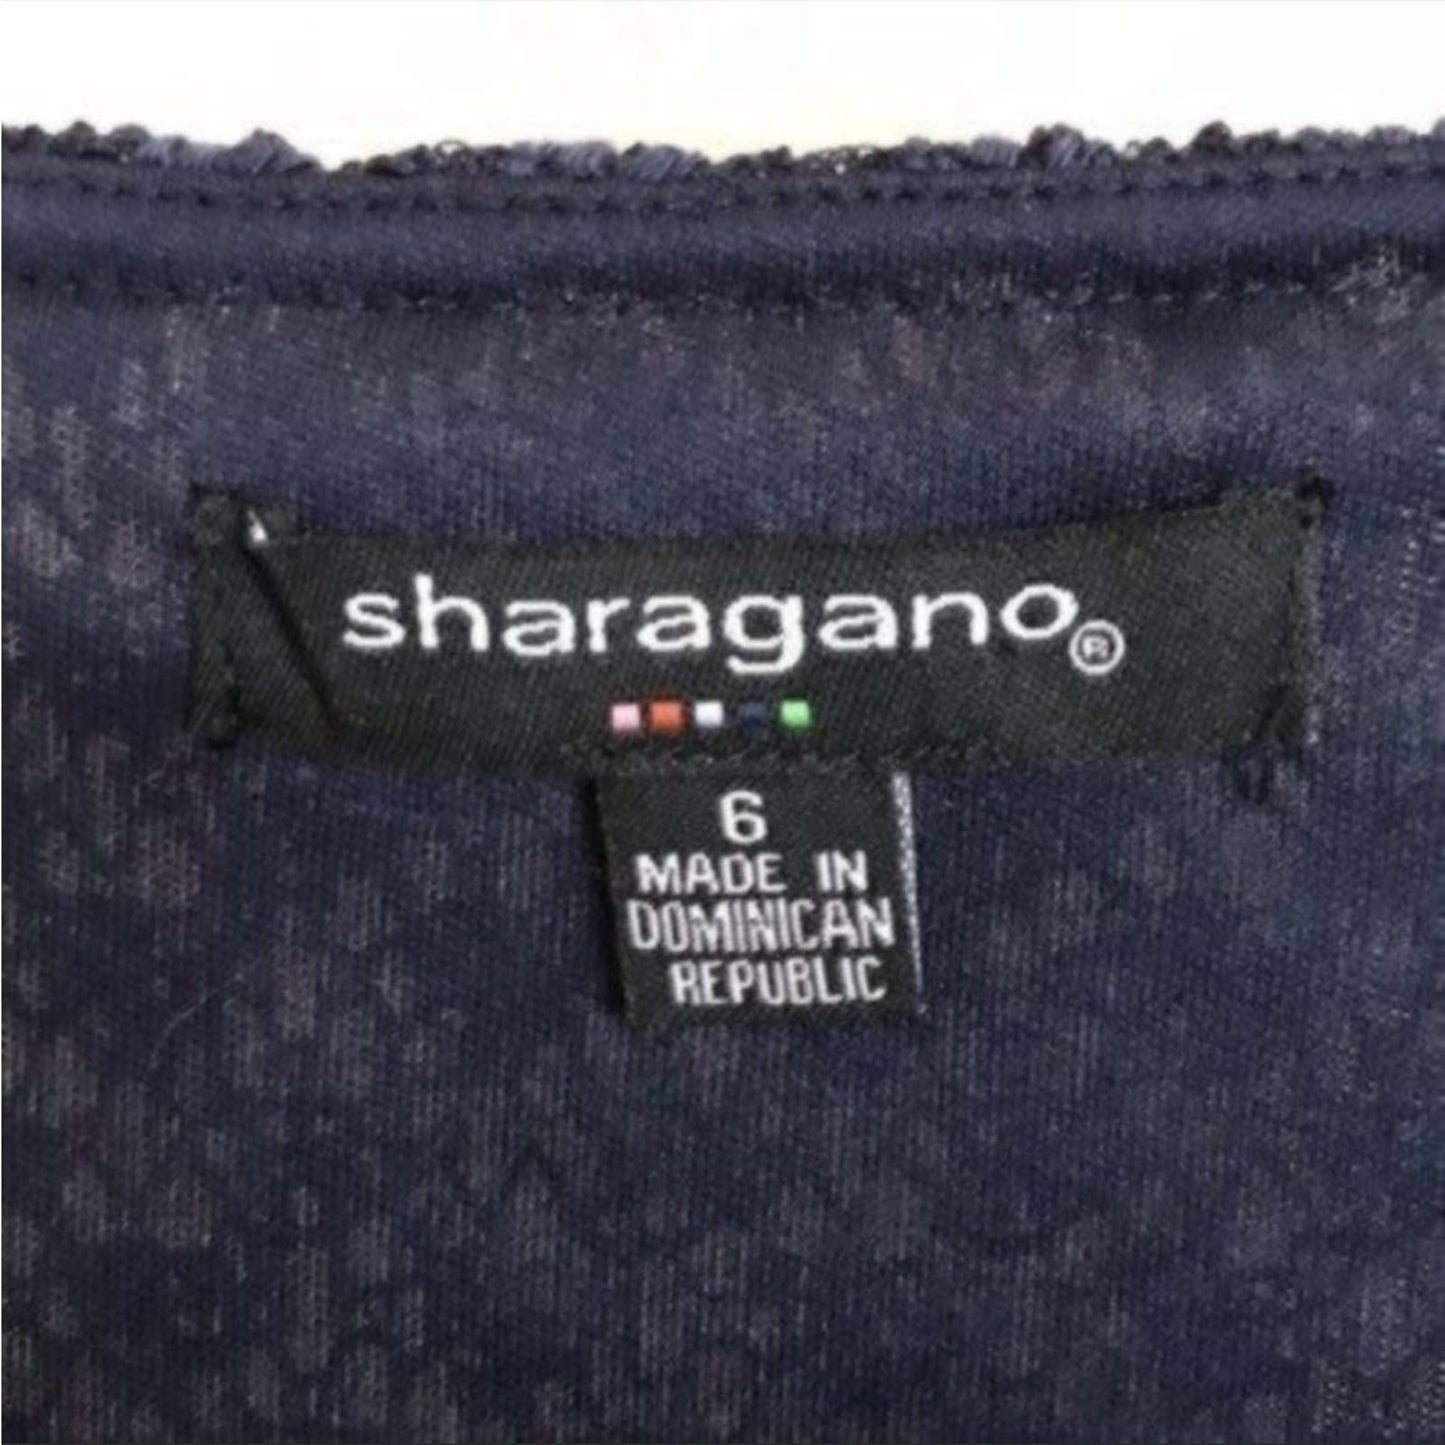 Sharagano Dress Deep Navy Blue Lace Overlay Sequin Shimmer Chevron Pattern Size 6